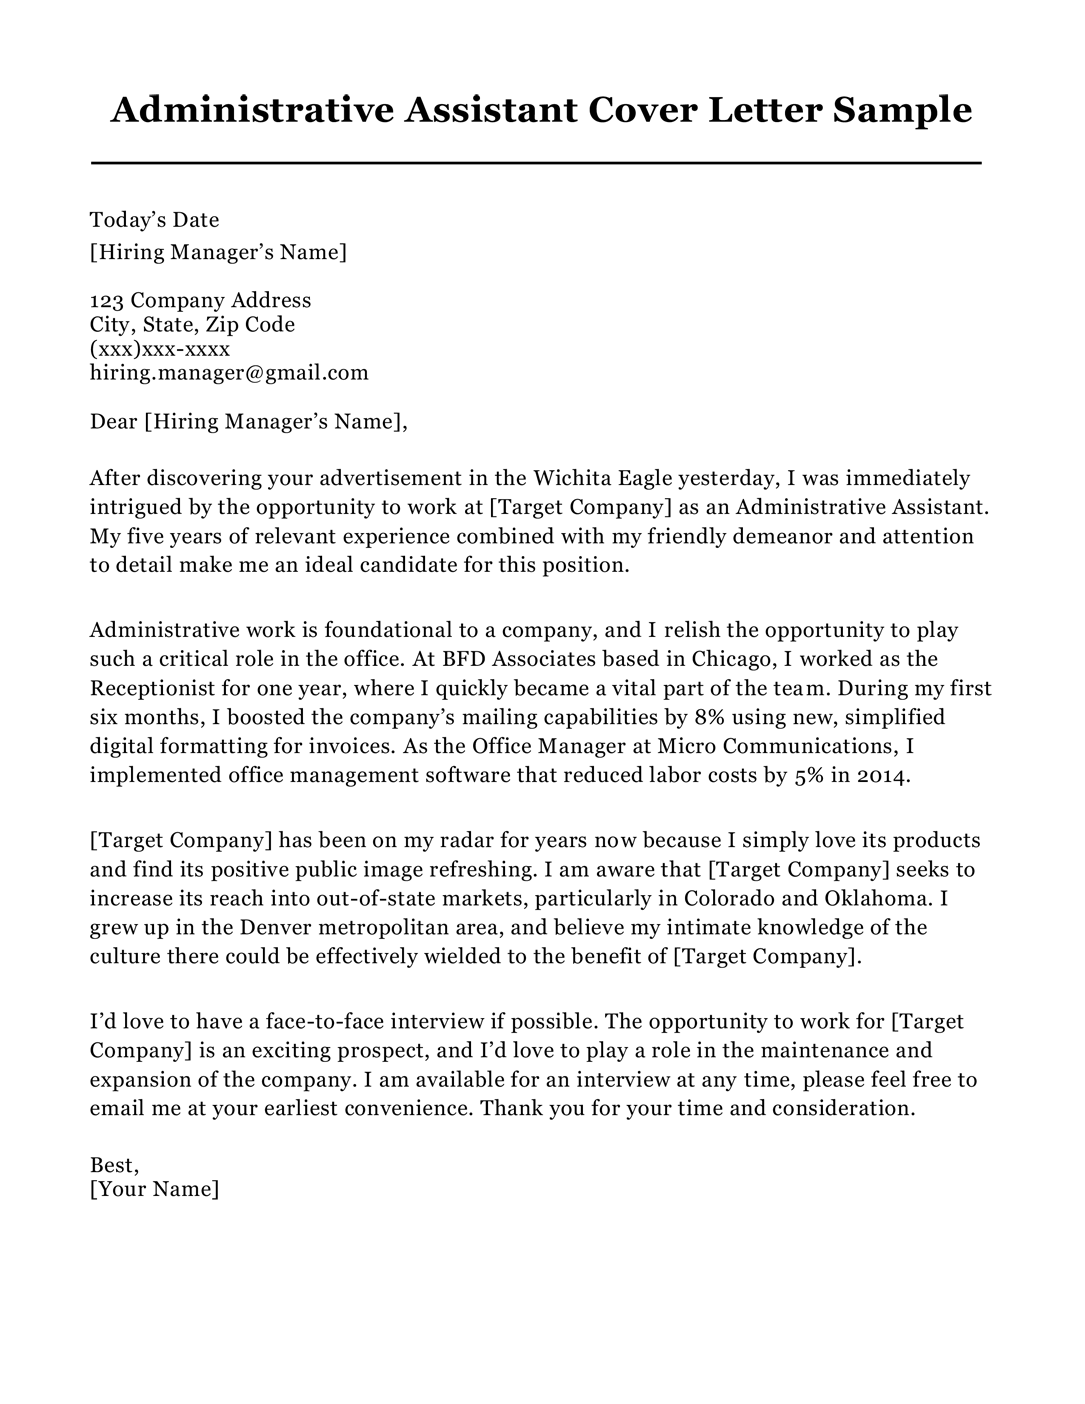 Administrative Assistant Cover Letter Example from resumecompanion.com